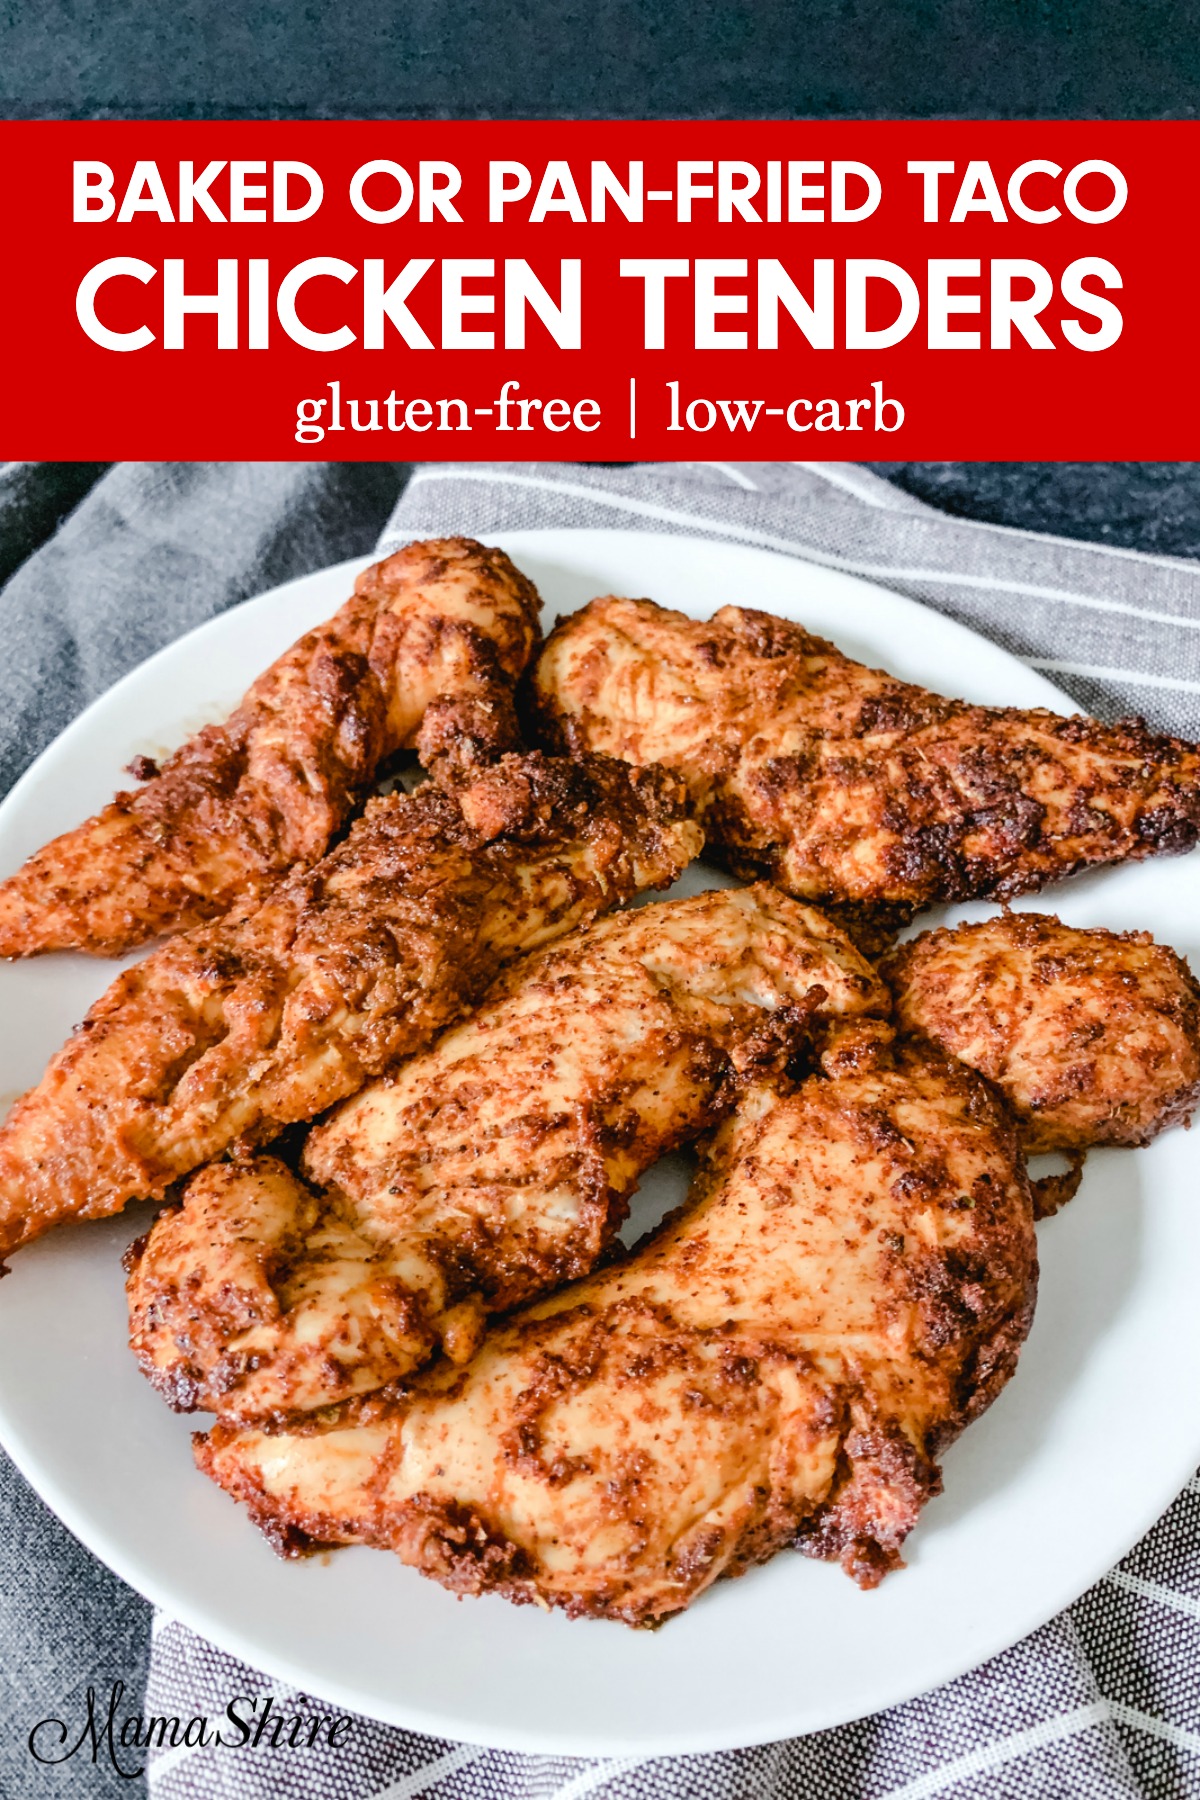 A platter of taco seasoned chicken tenders from a recipe that you can pan fry or bake.